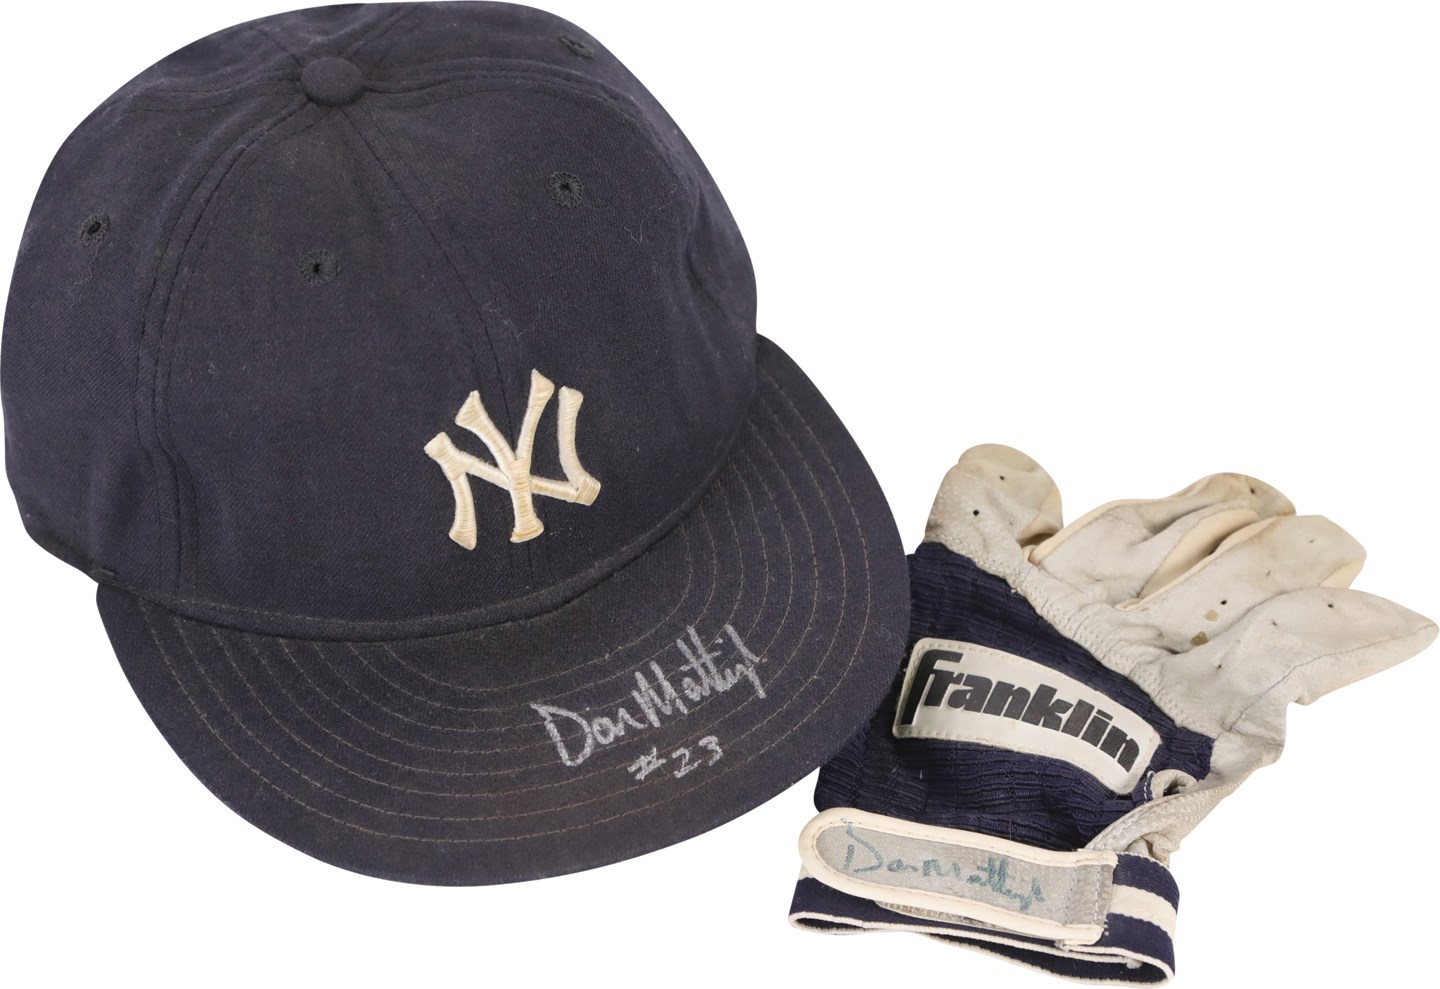 Baseball Equipment - 1985 Don Mattingly Rookie New York Yankees Game Used Hat and Signed Batting Glove (PSA)